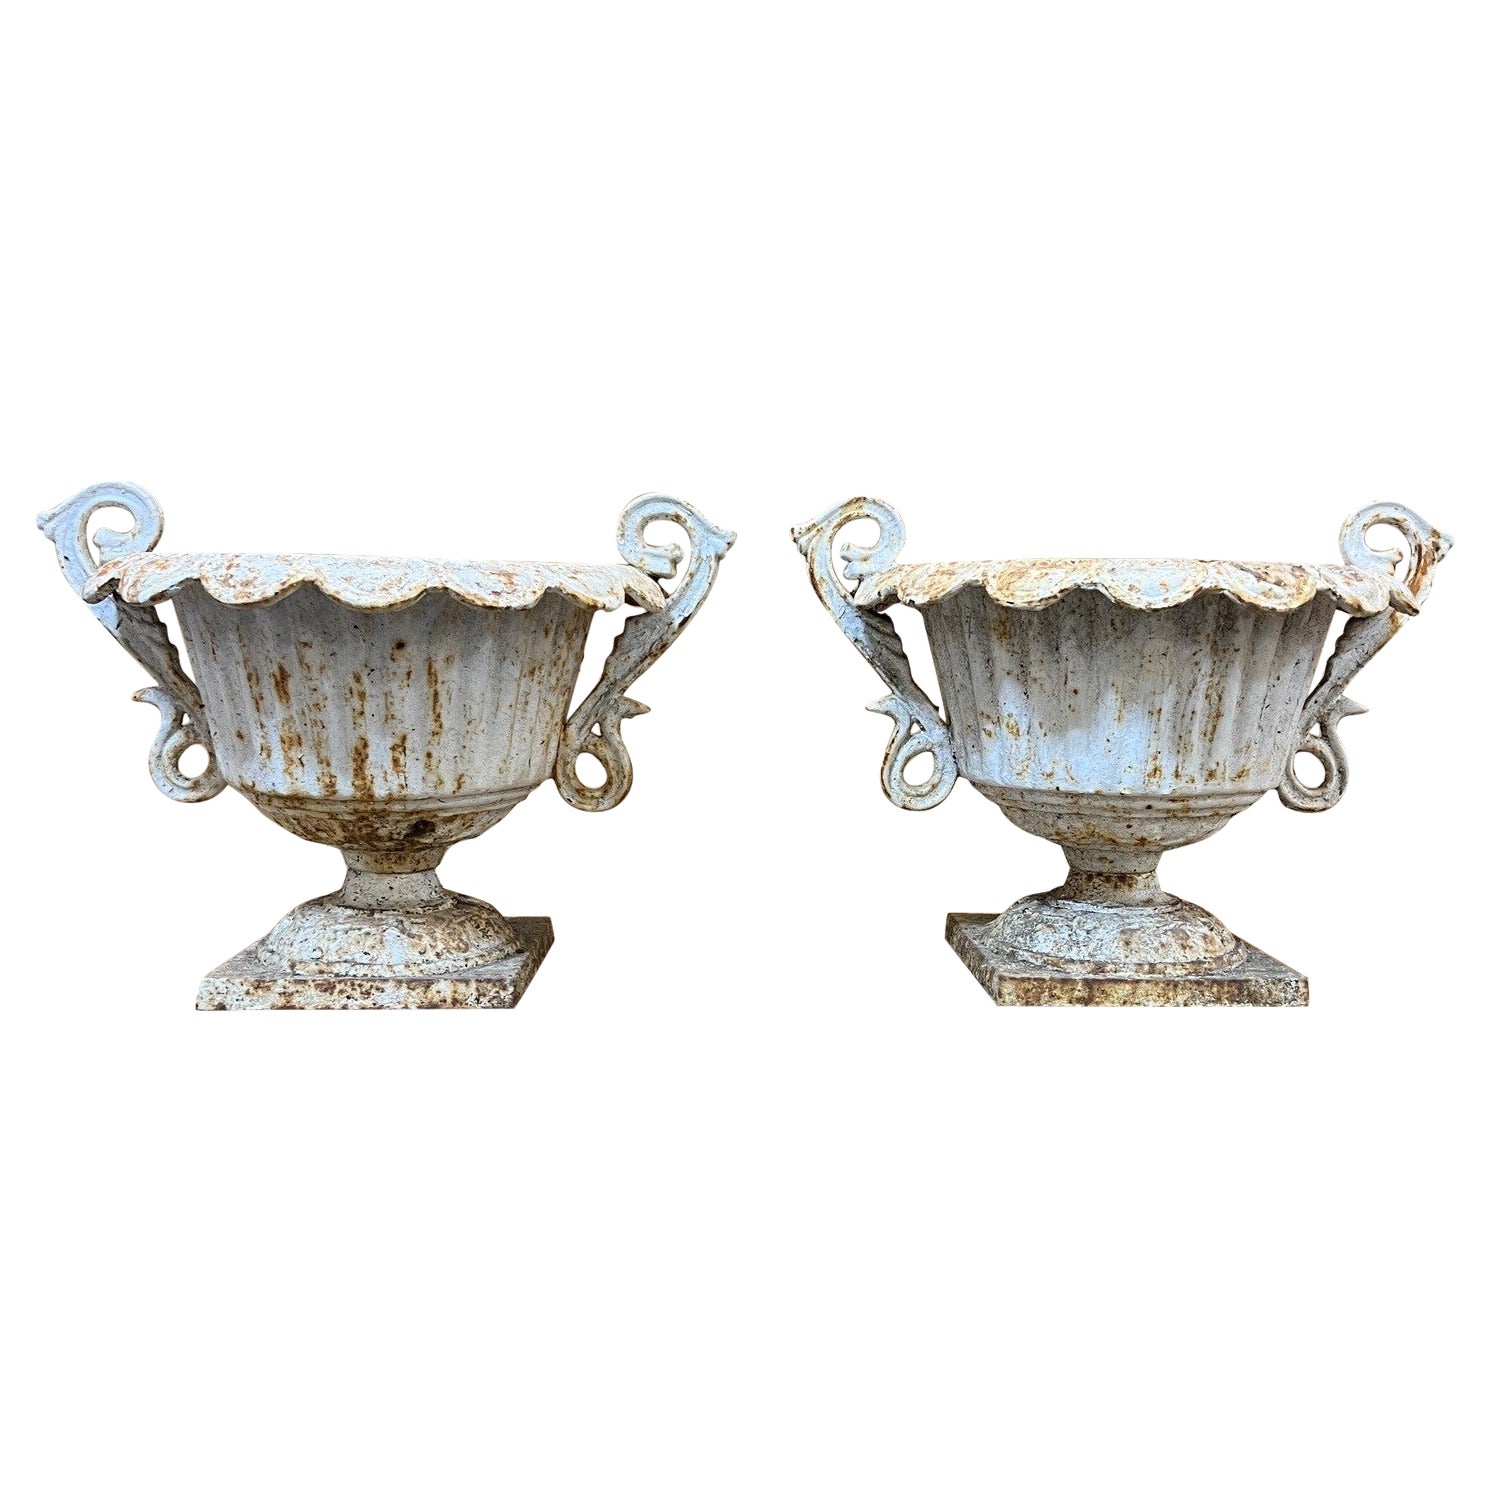 Mid-20th Century Small Pair of Cast Iron Fluted Urns with Decorative Handles